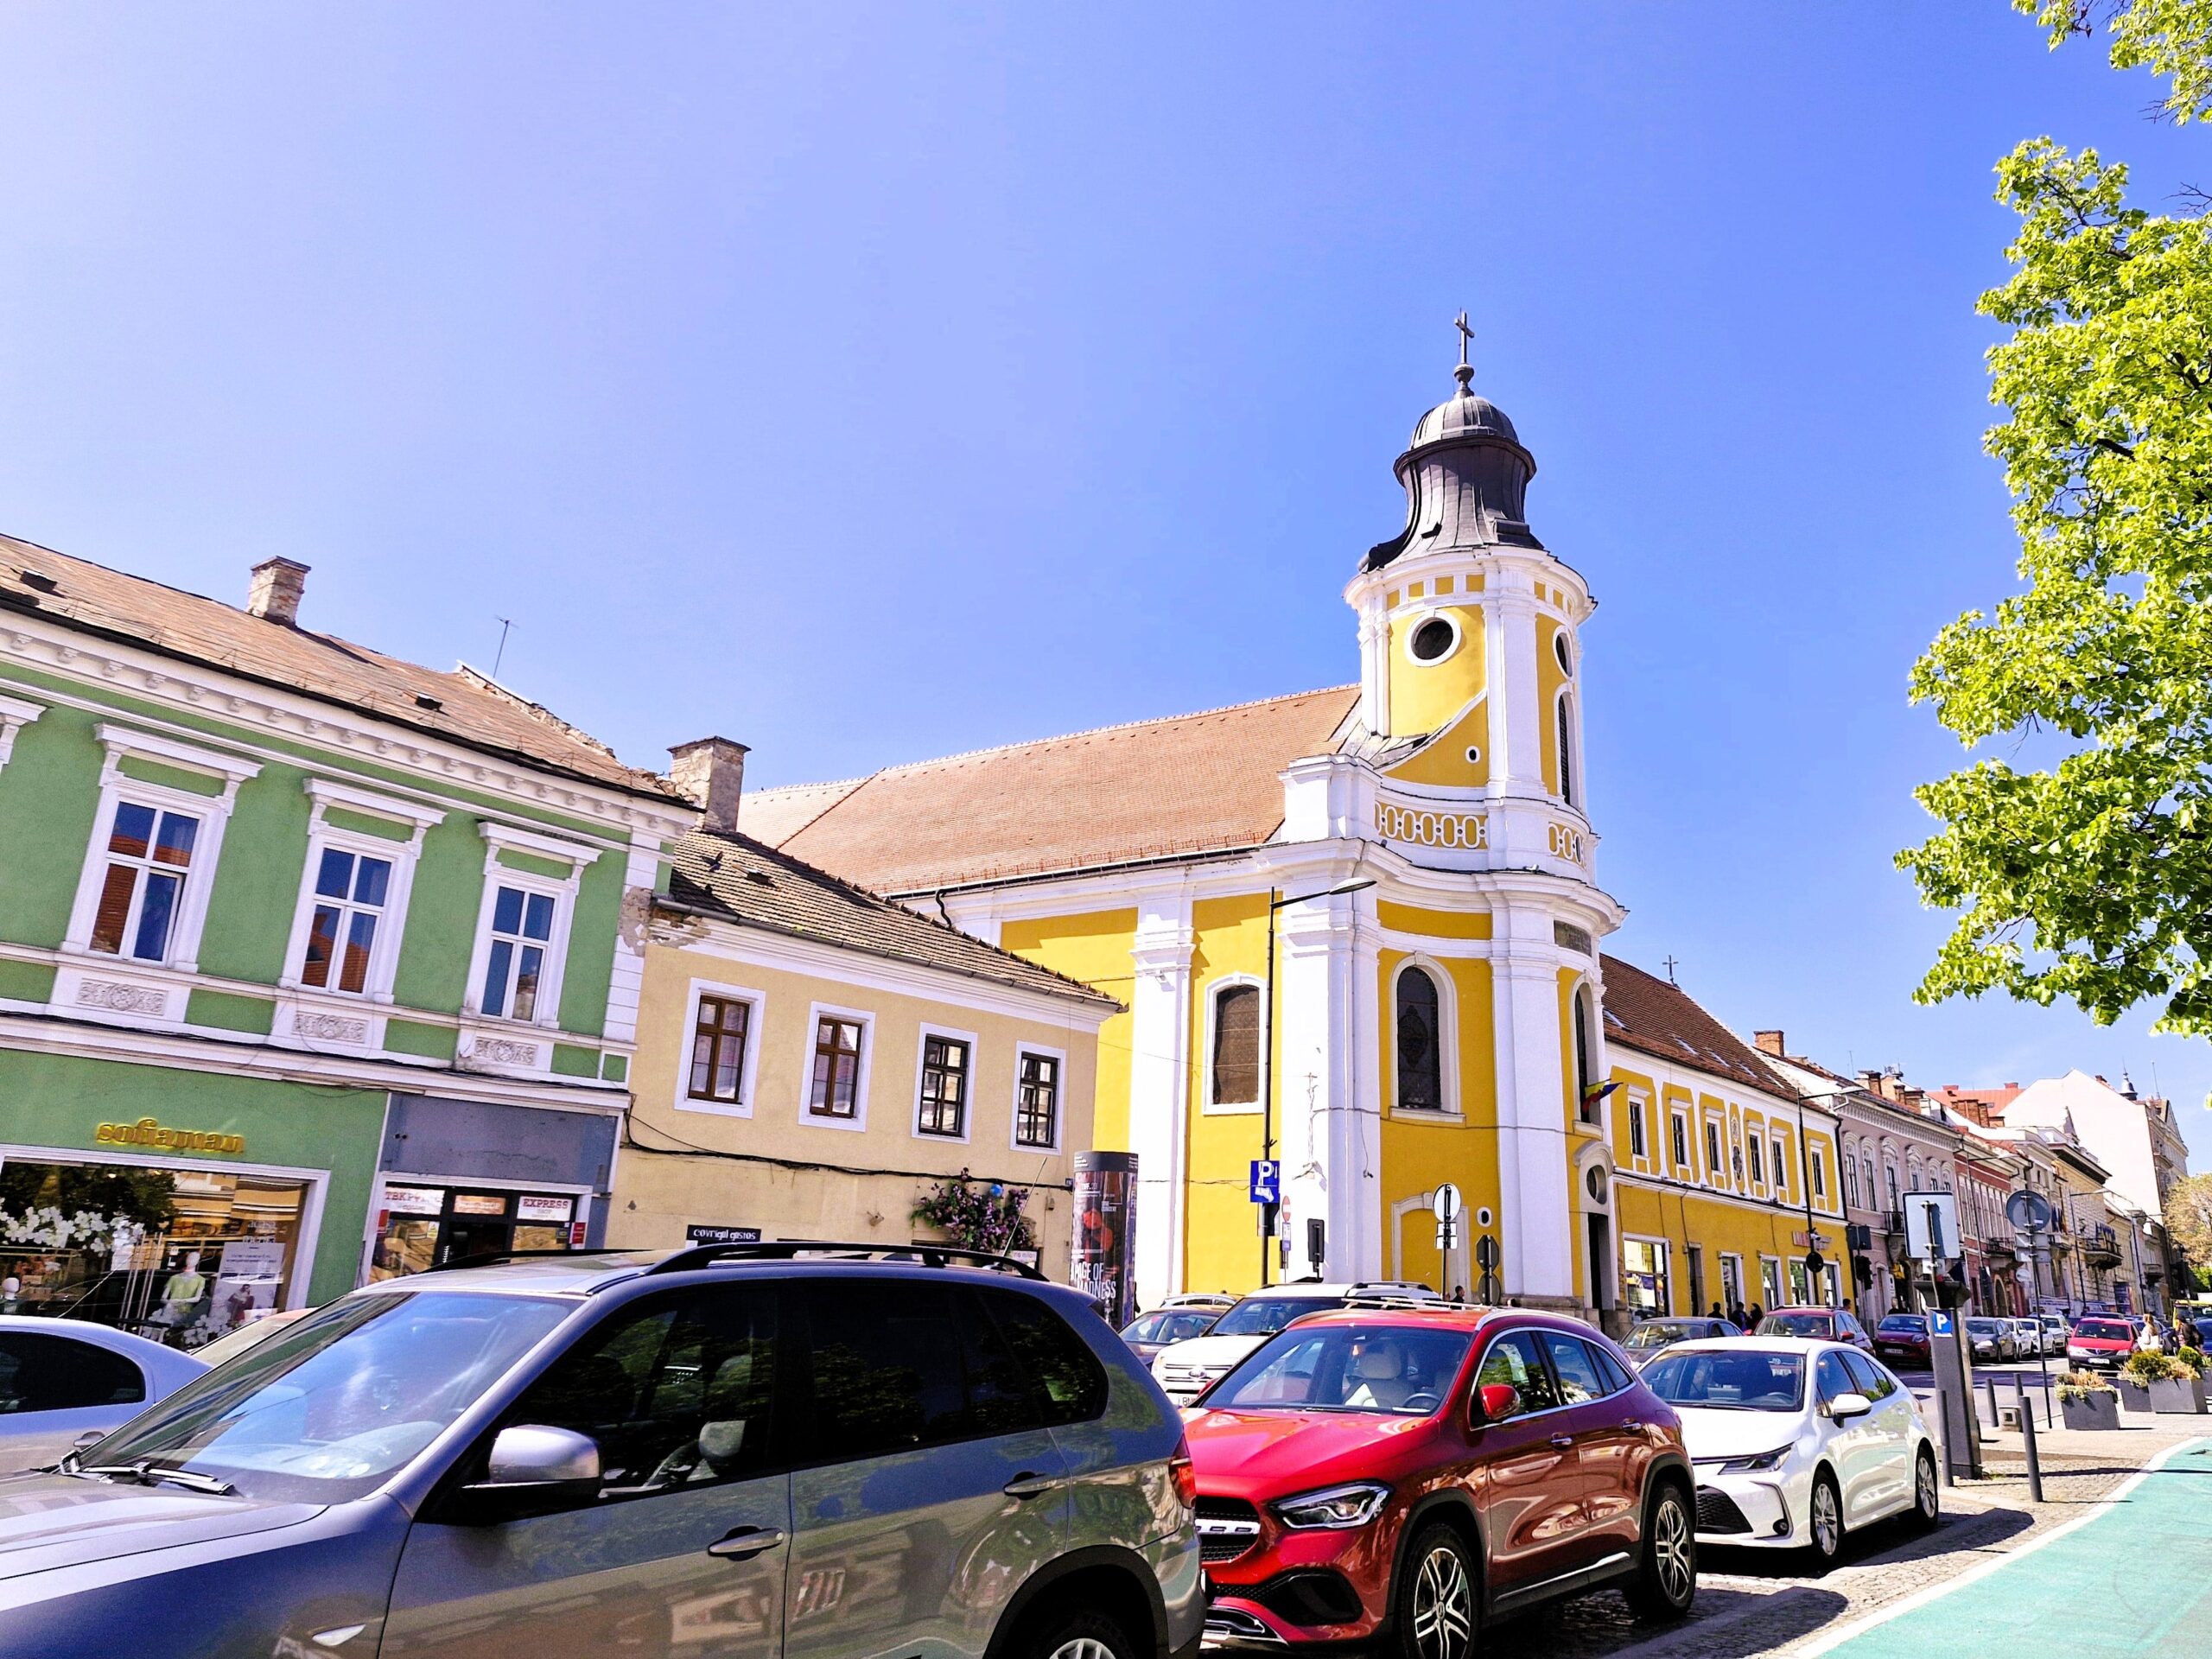 A bright yellow spire stands tall in a street in Cluj-Napoca, Romania